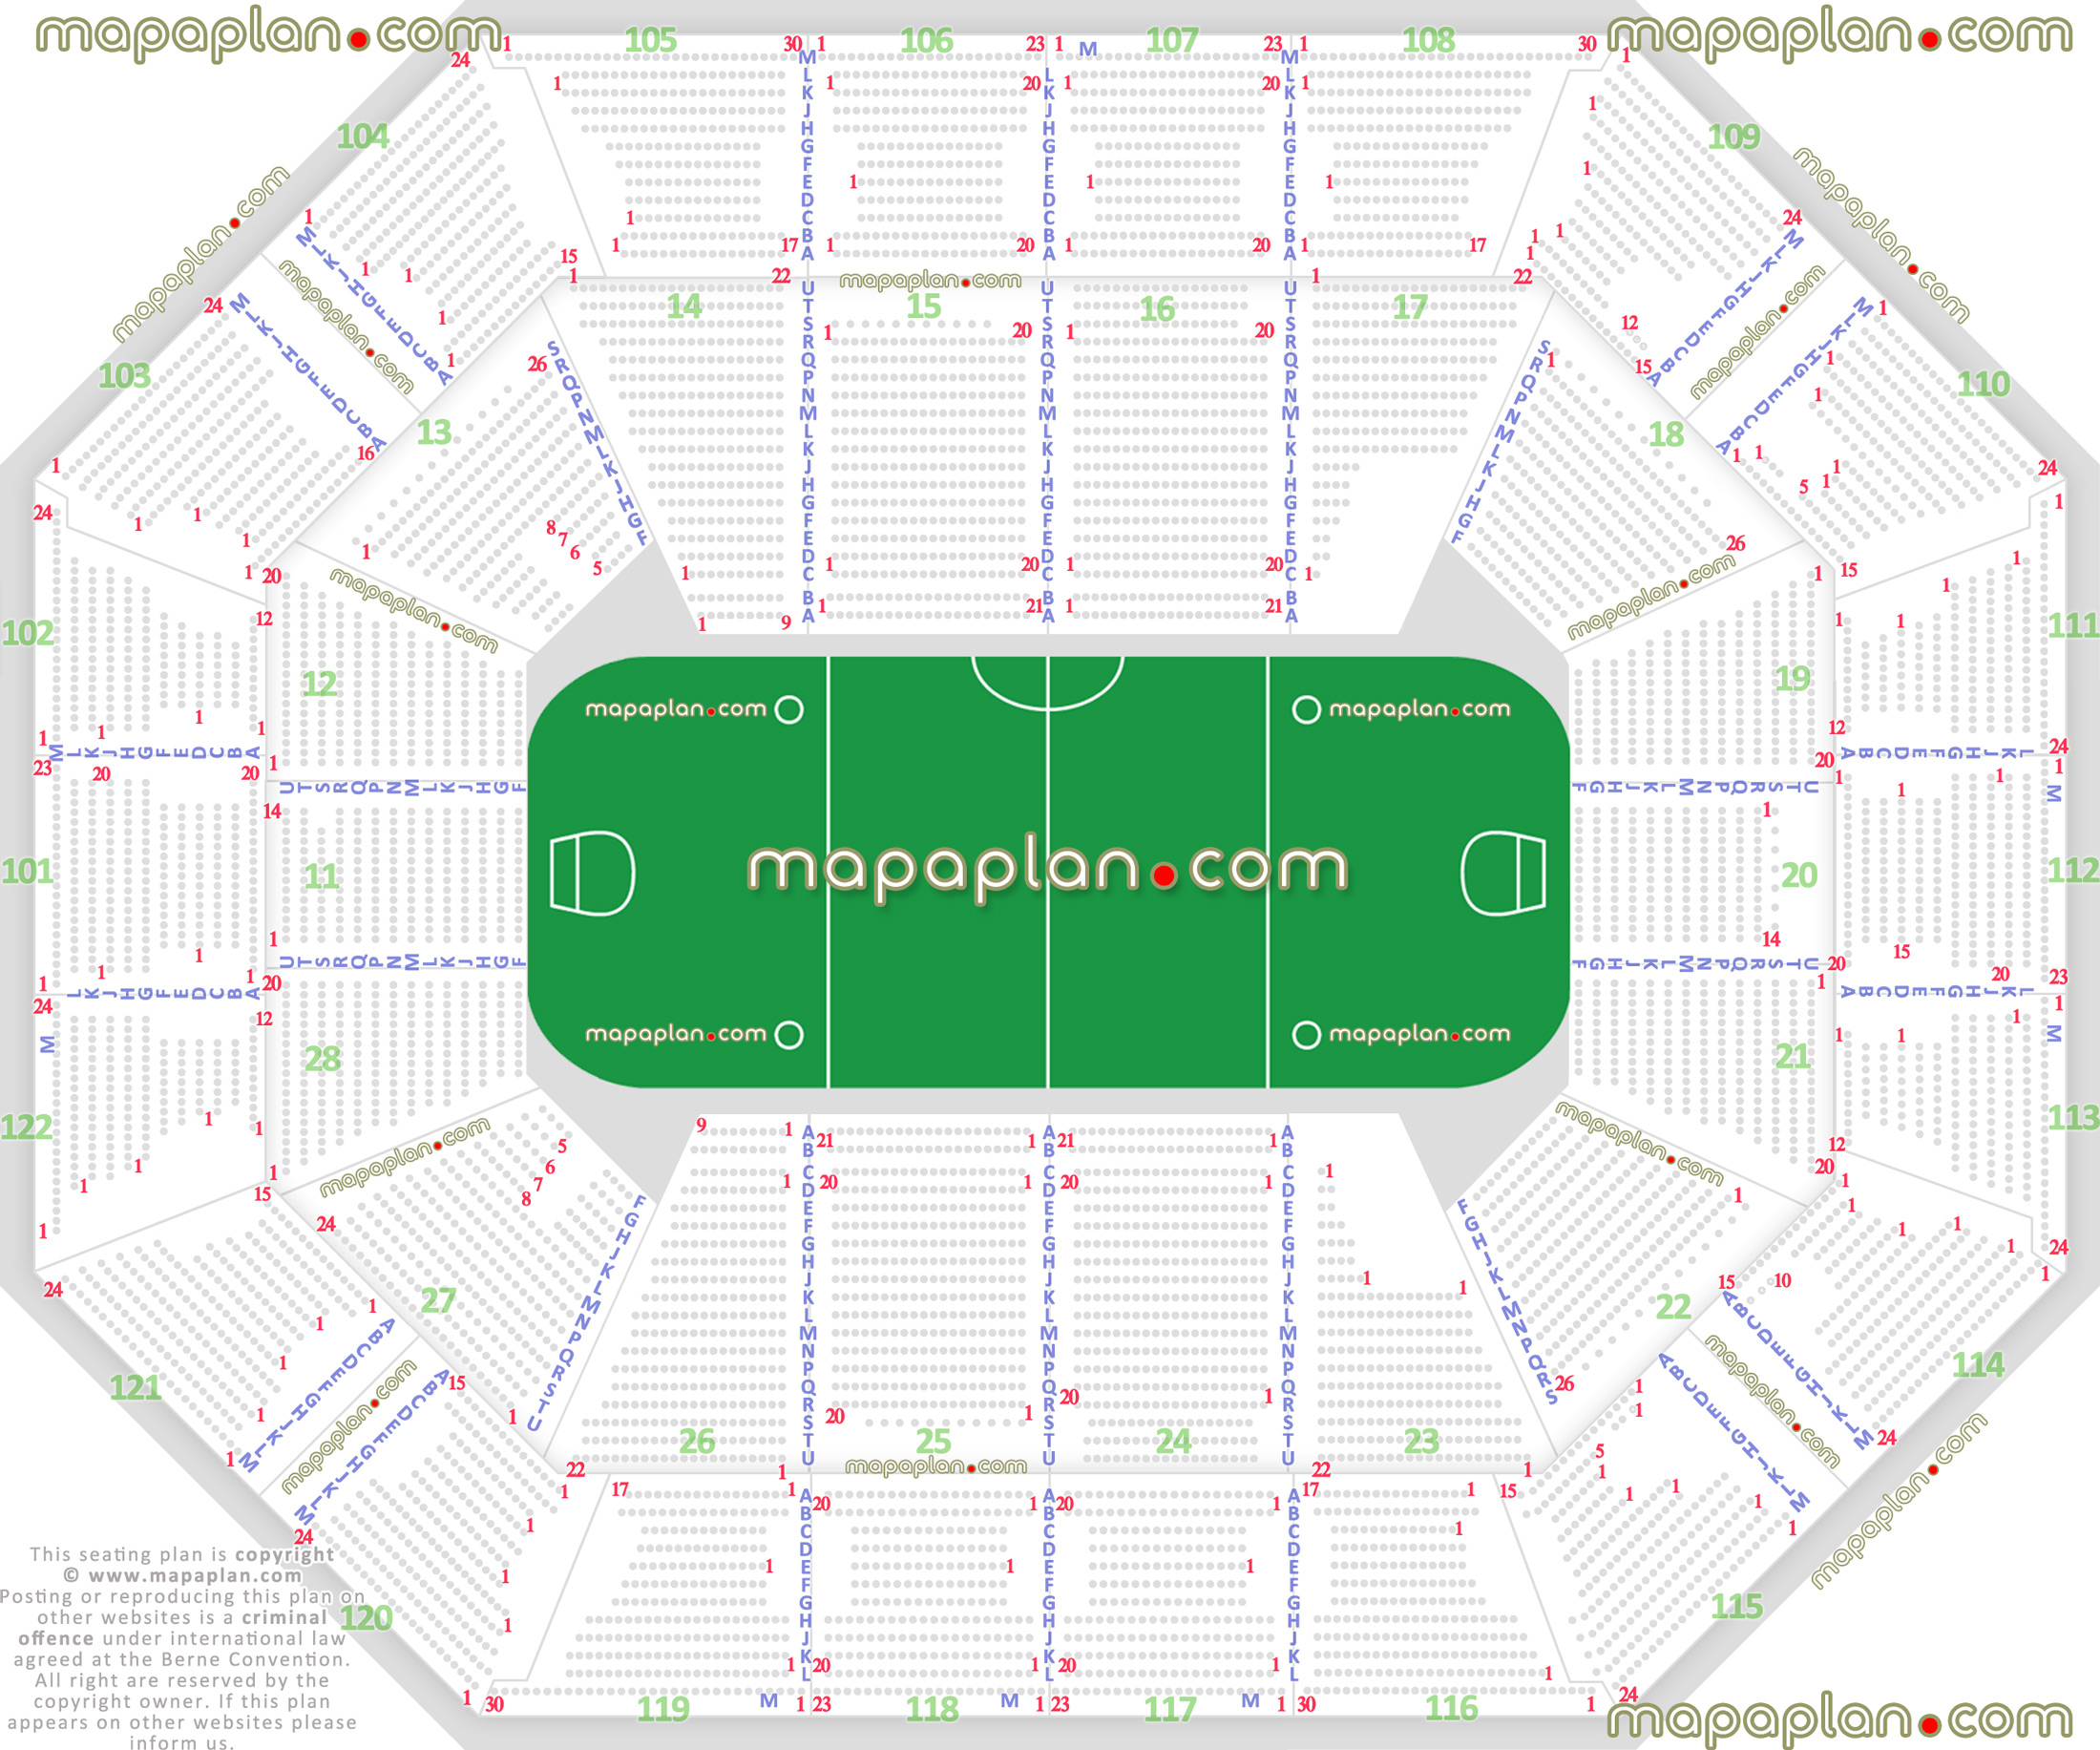 lacrosse new england black wolves nll ct printable virtual information guide full exact letters numbers floor plan review rows a b c d e f g h j k l m n p q r s t u v Uncasville Mohegan Sun Arena seating chart